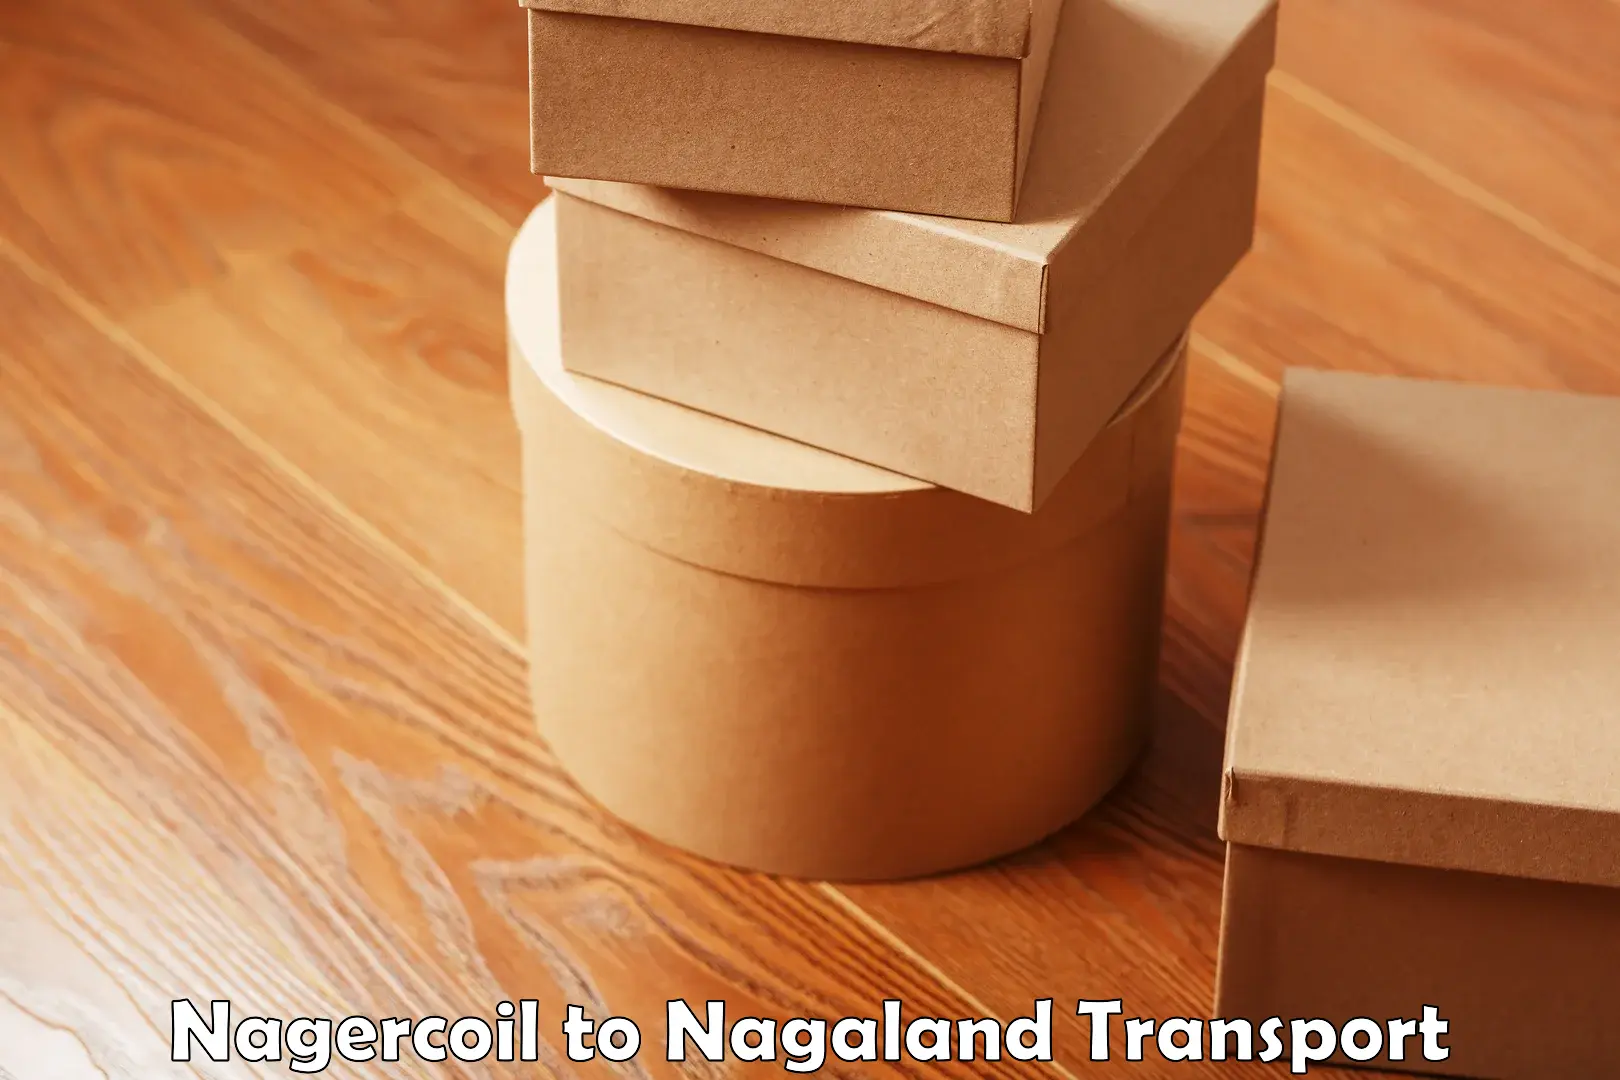 Nearby transport service Nagercoil to Nagaland